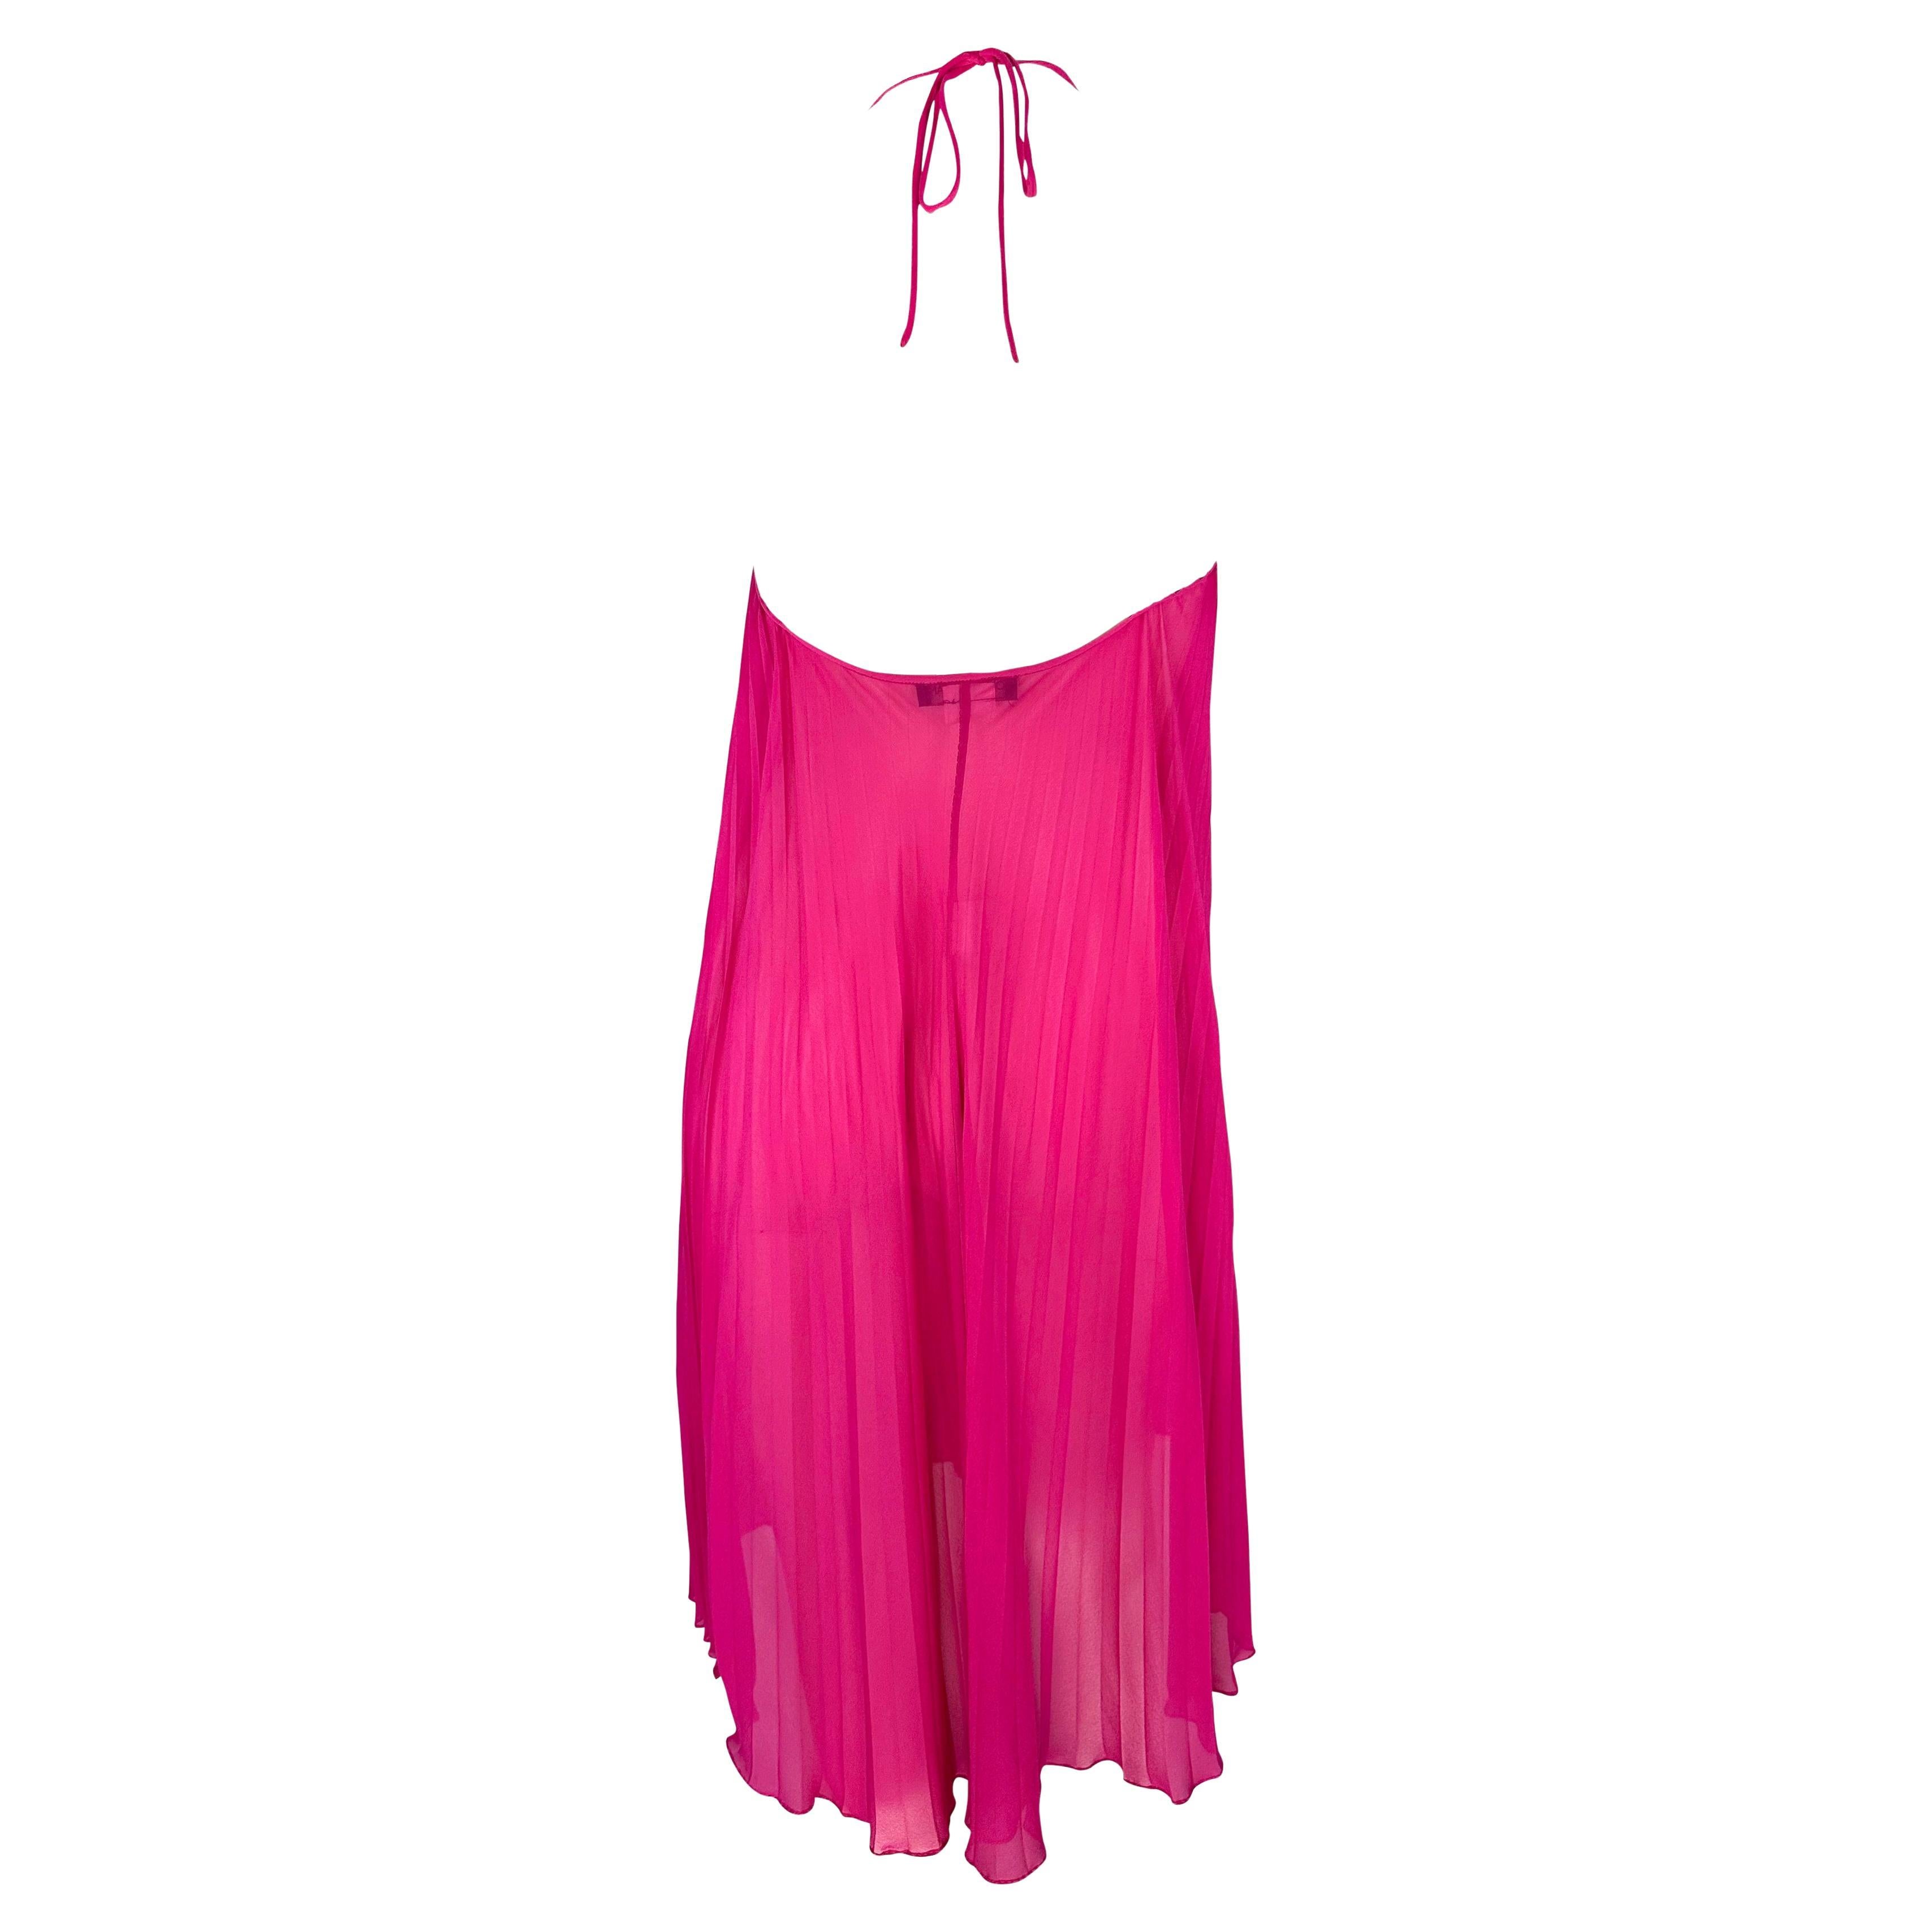 F/W 2000 Dolce & Gabbana Sheer Hot Pink Pleated Chiffon Floral Appliqué Dress For Sale 7